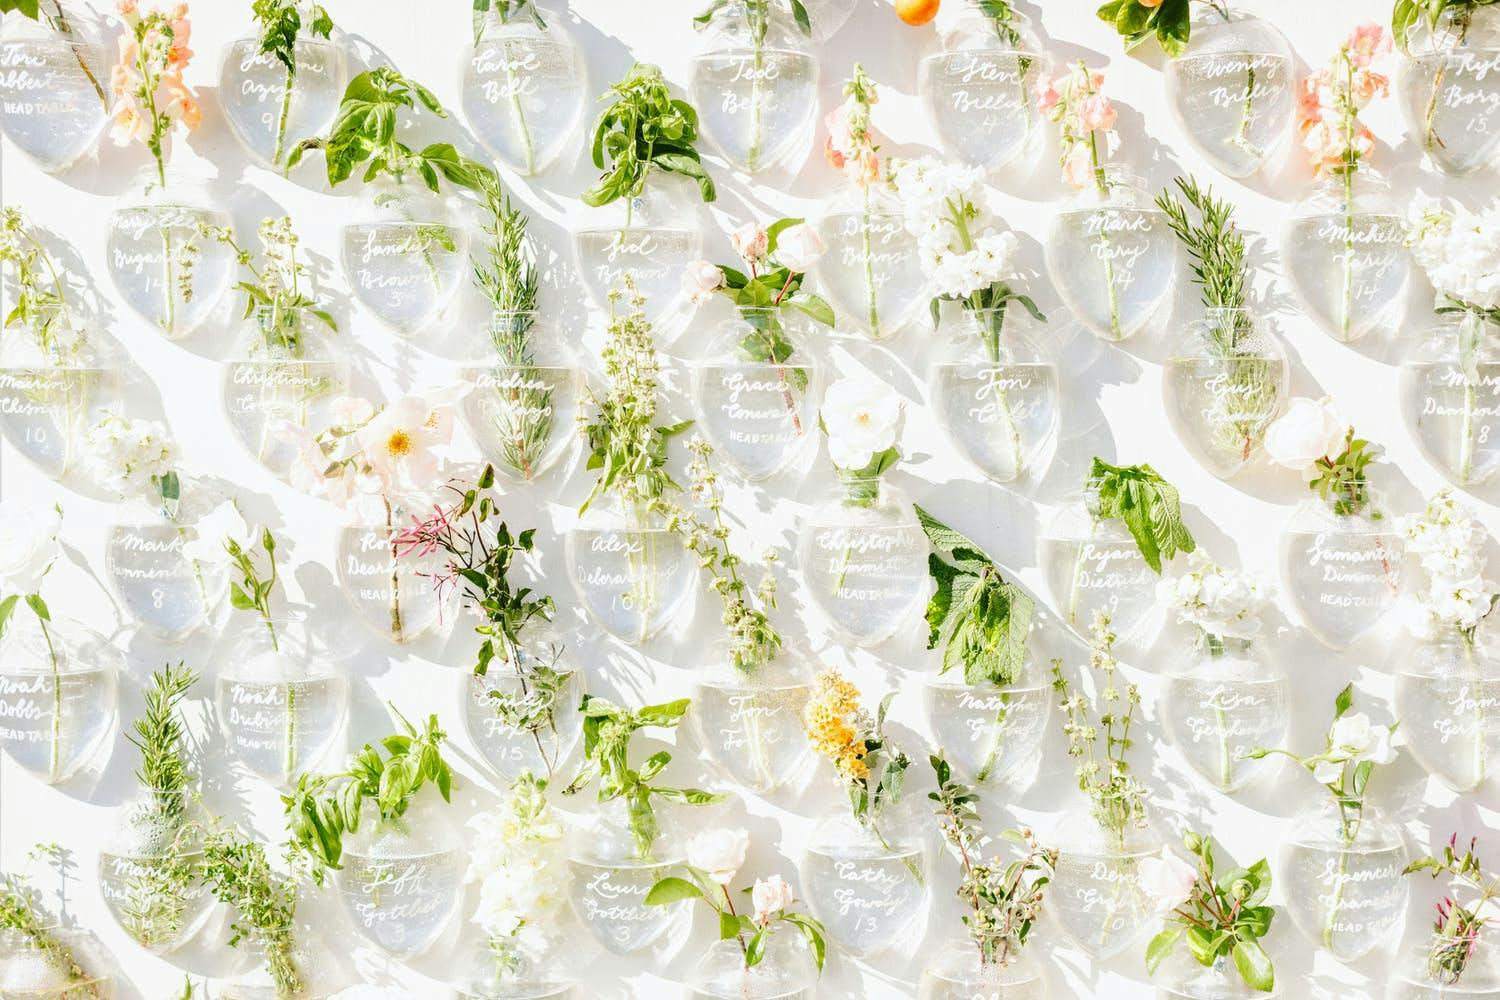 Wedding Seating Backdrop With Inscribed Vases and Bright Flowers | PartySlate